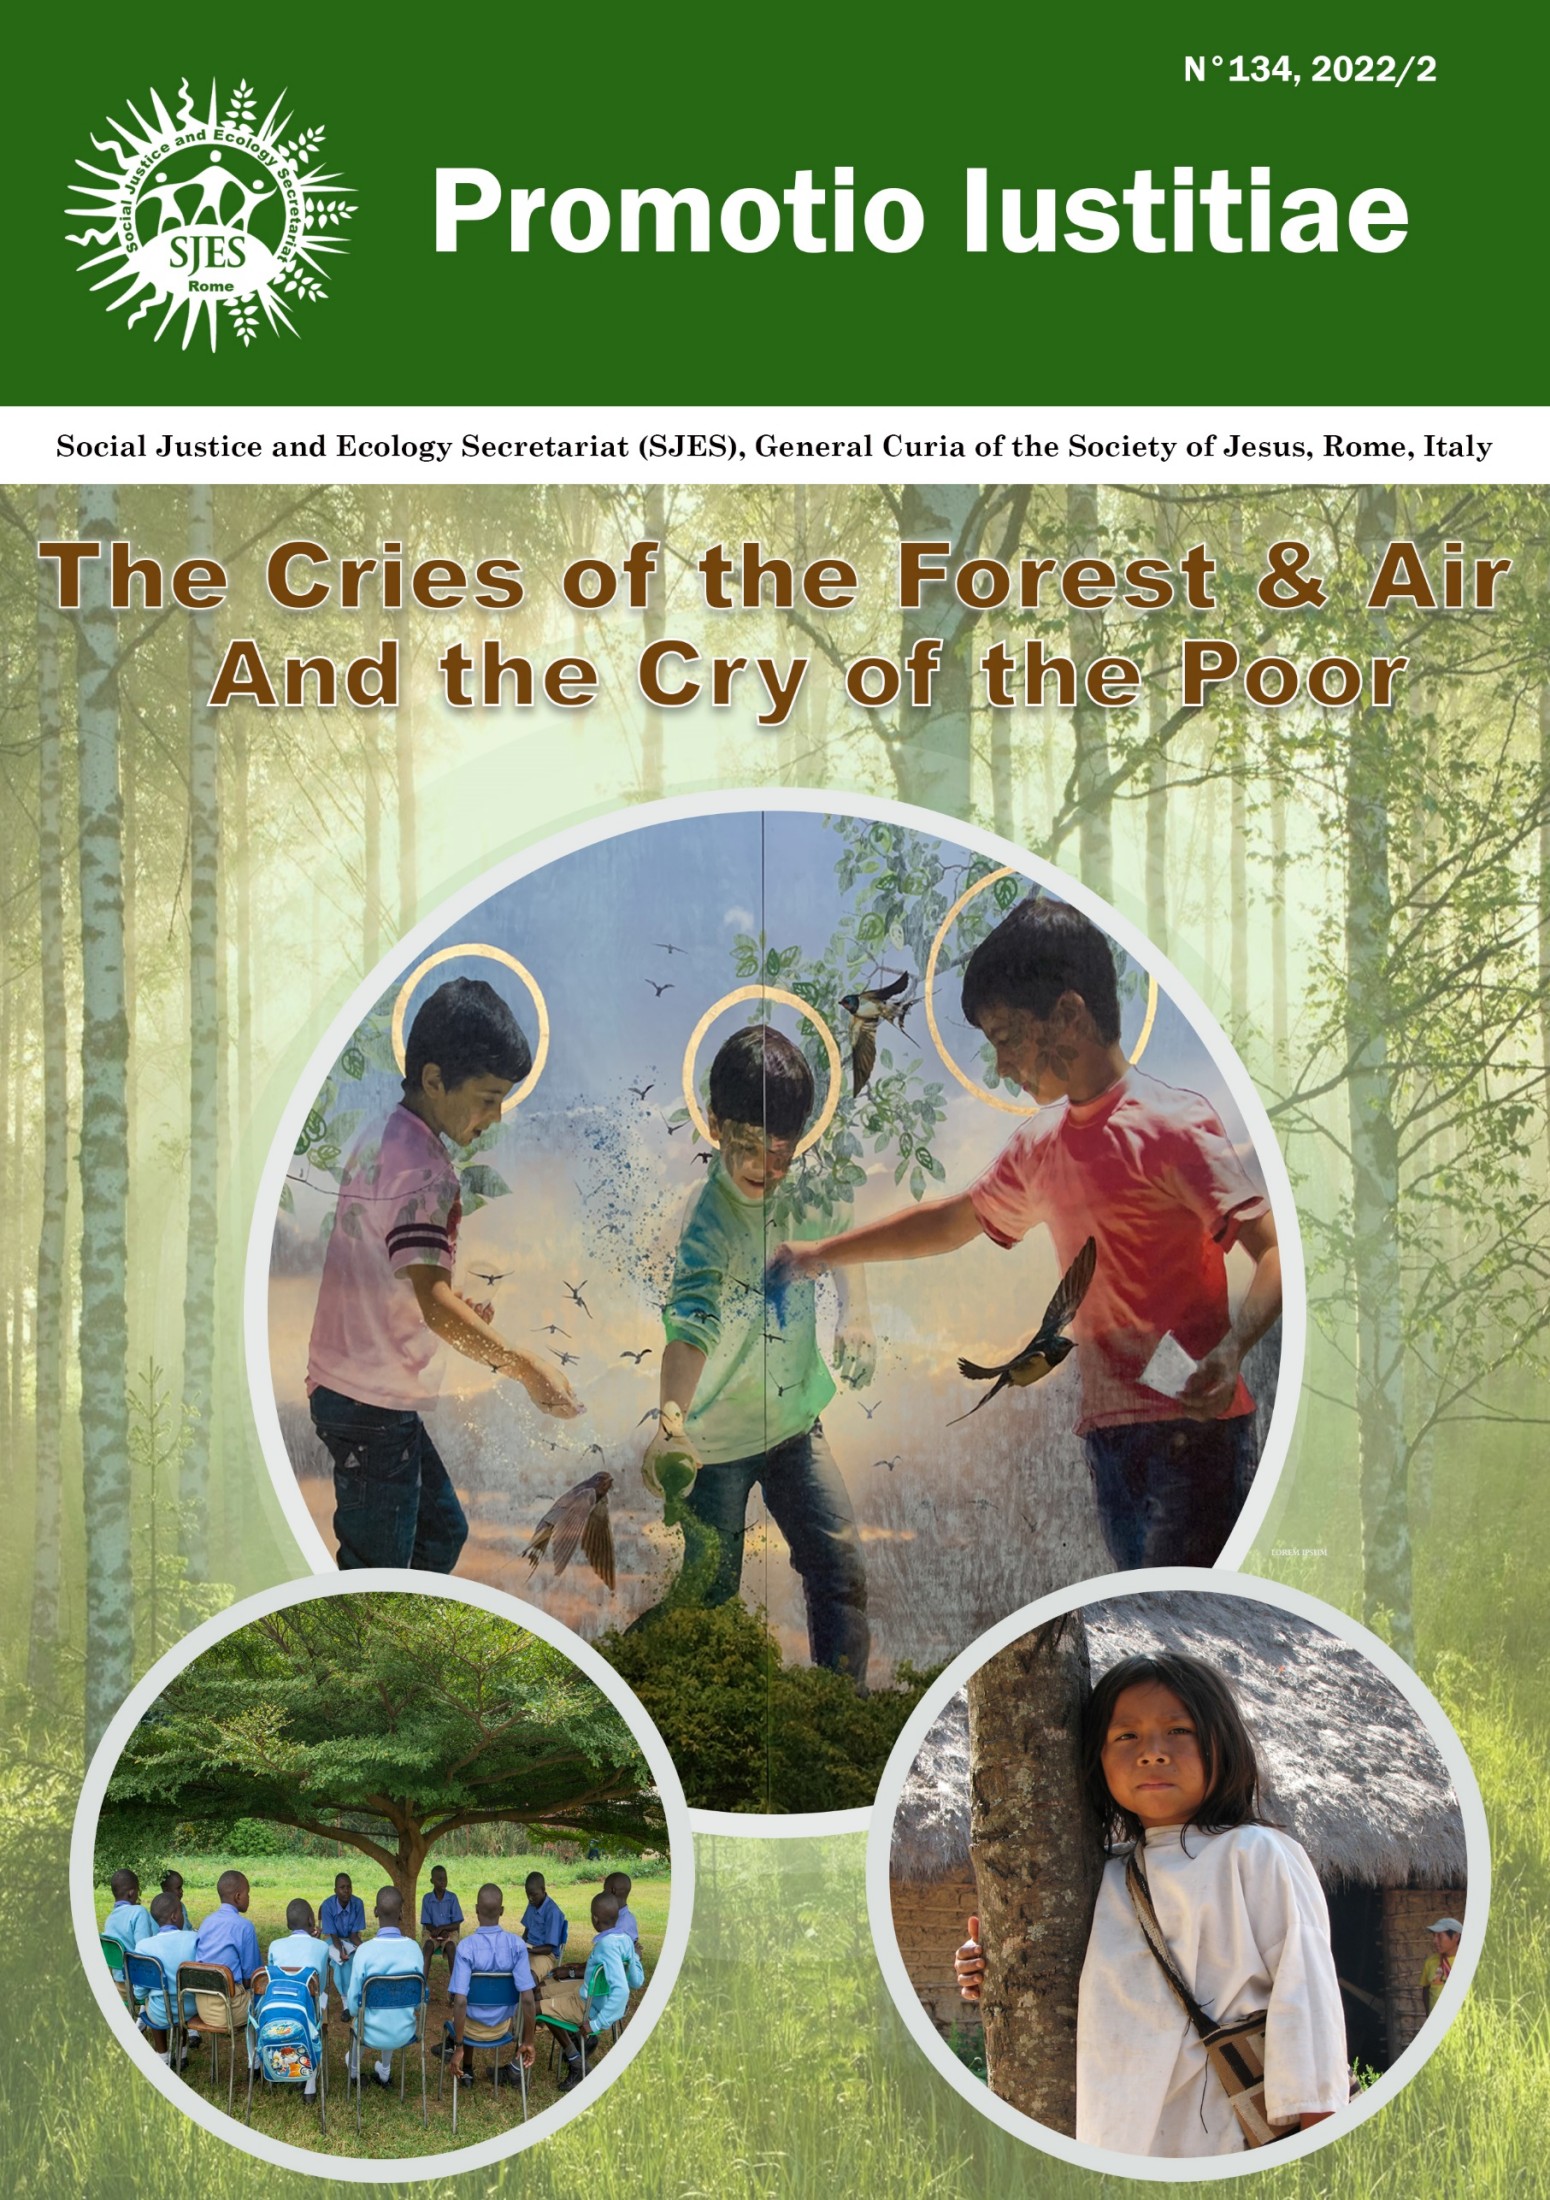 The Cries of the Forest & Air and the Cry of the Poor